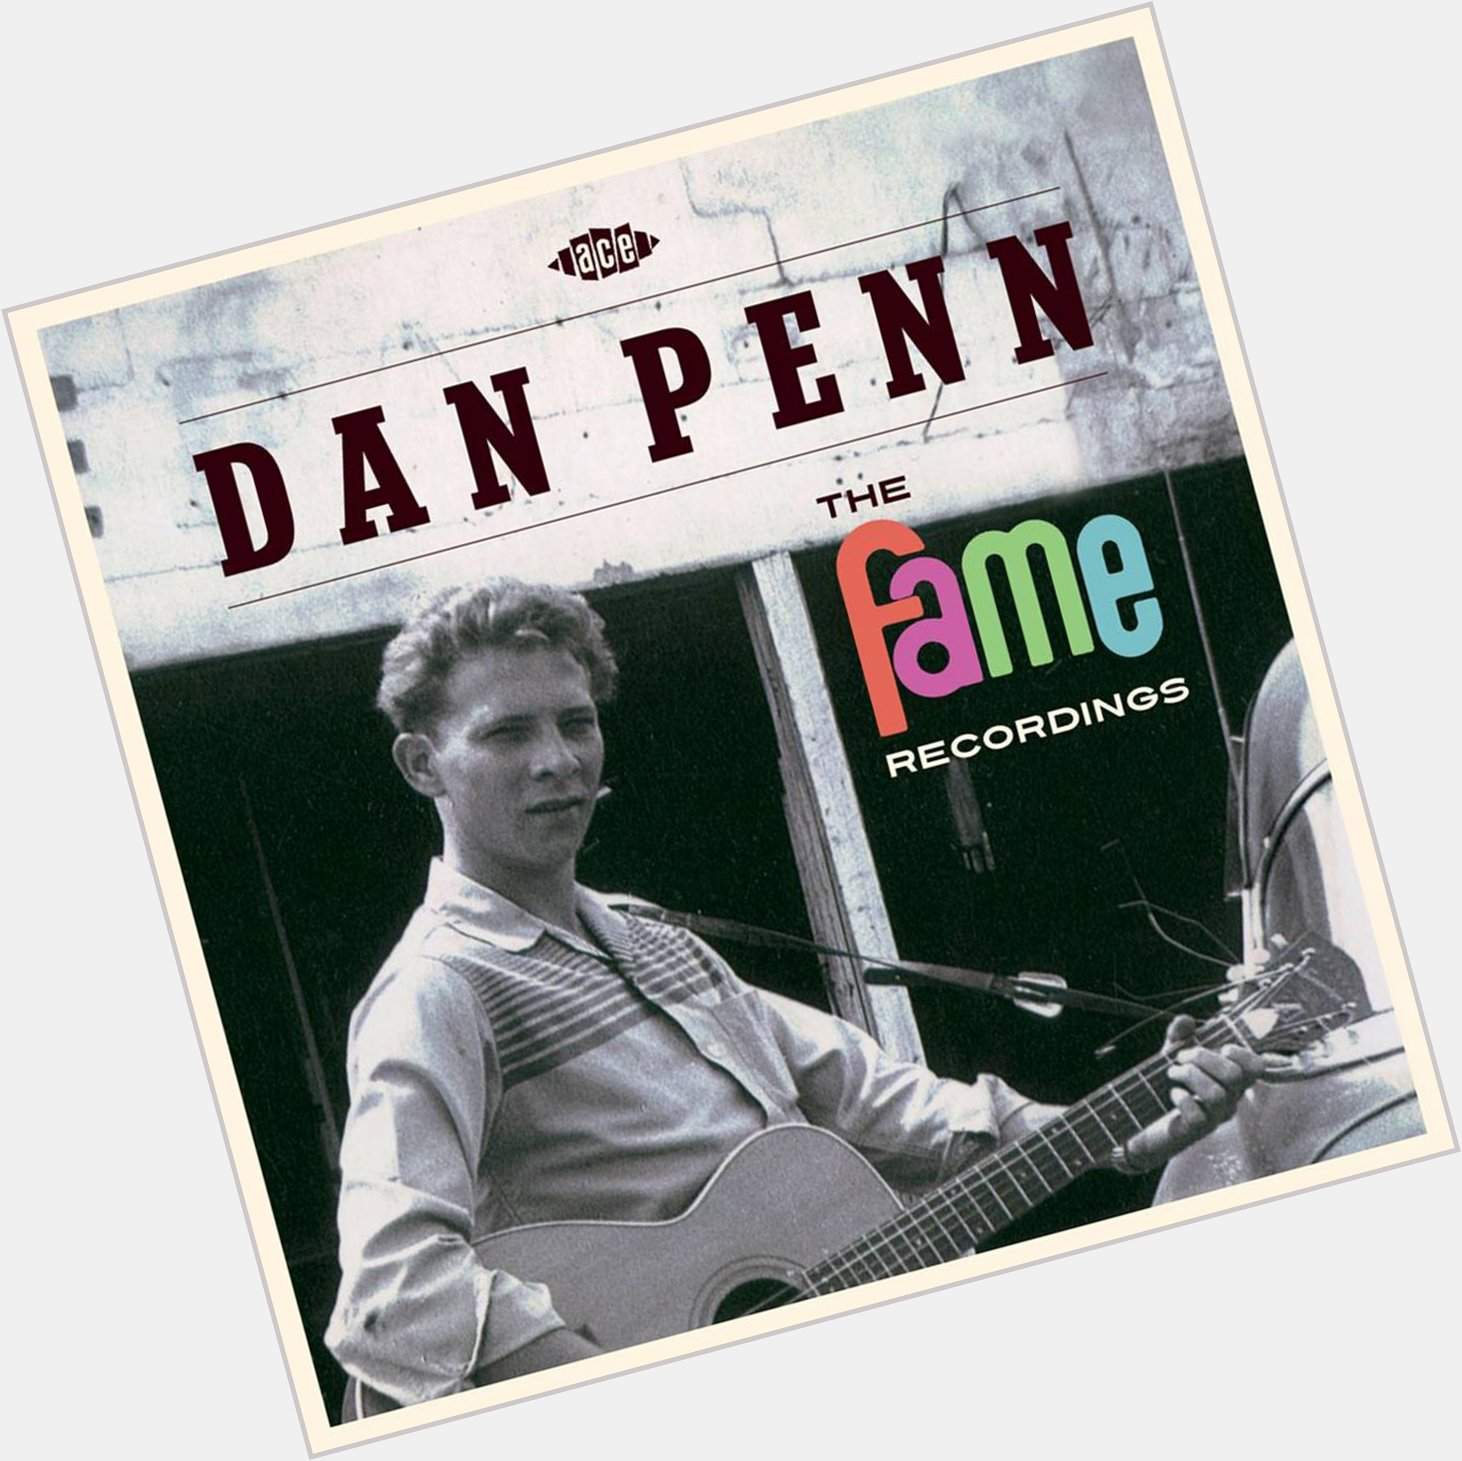 Happy Birthday Dan Penn from your friends and fans at Ace 